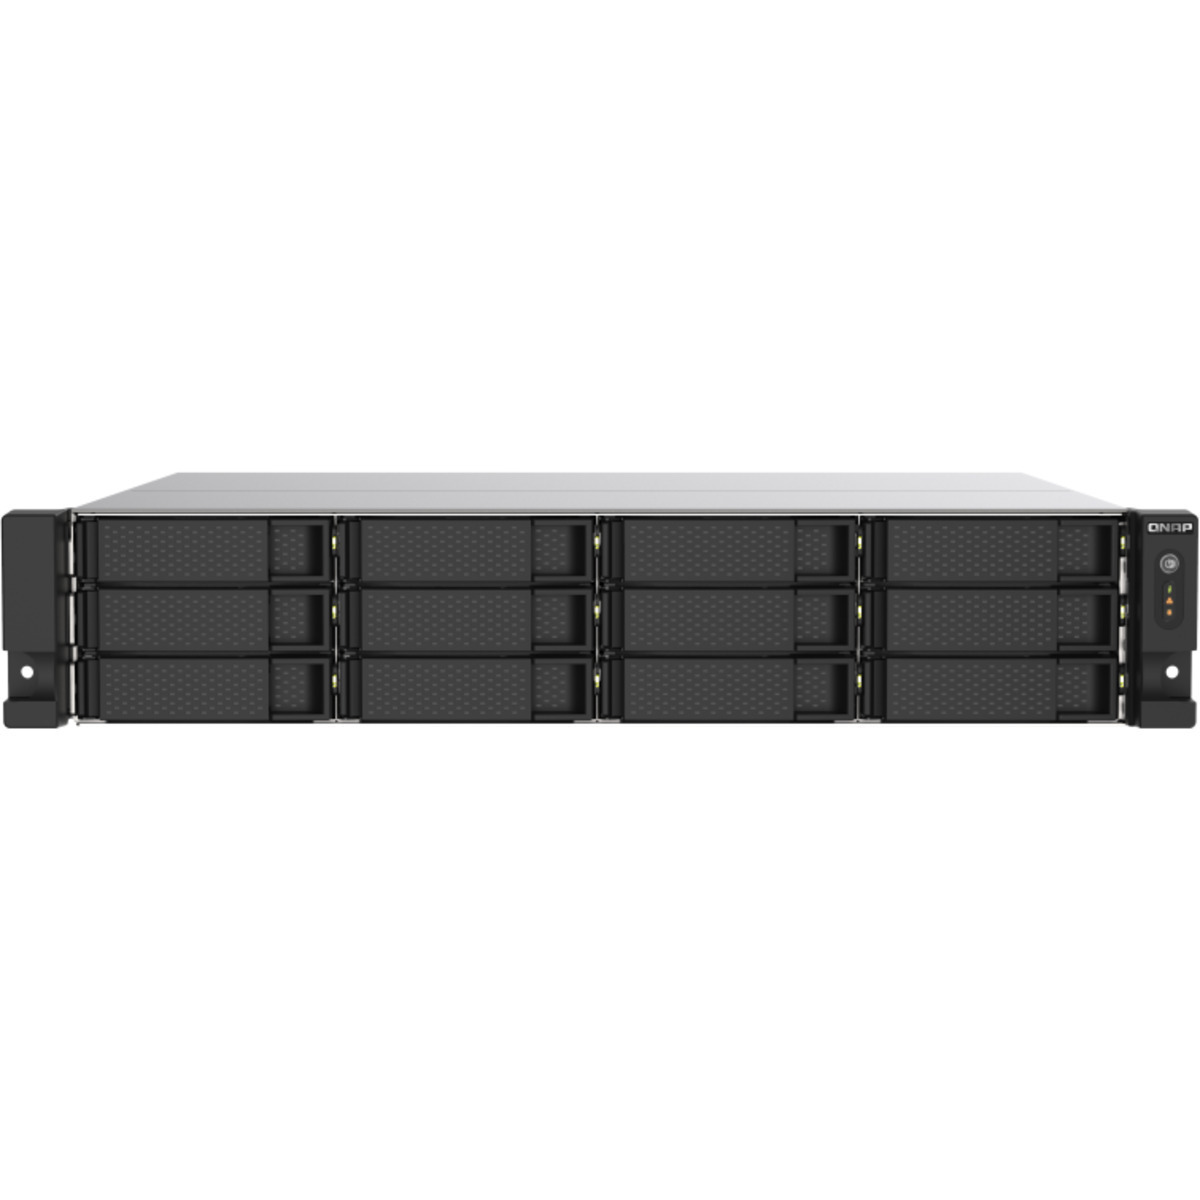 QNAP TS-1273AU-RP 110tb 12-Bay RackMount Multimedia / Power User / Business NAS - Network Attached Storage Device 11x10tb Western Digital Gold WD102KRYZ 3.5 7200rpm SATA 6Gb/s HDD ENTERPRISE Class Drives Installed - Burn-In Tested - FREE RAM UPGRADE TS-1273AU-RP